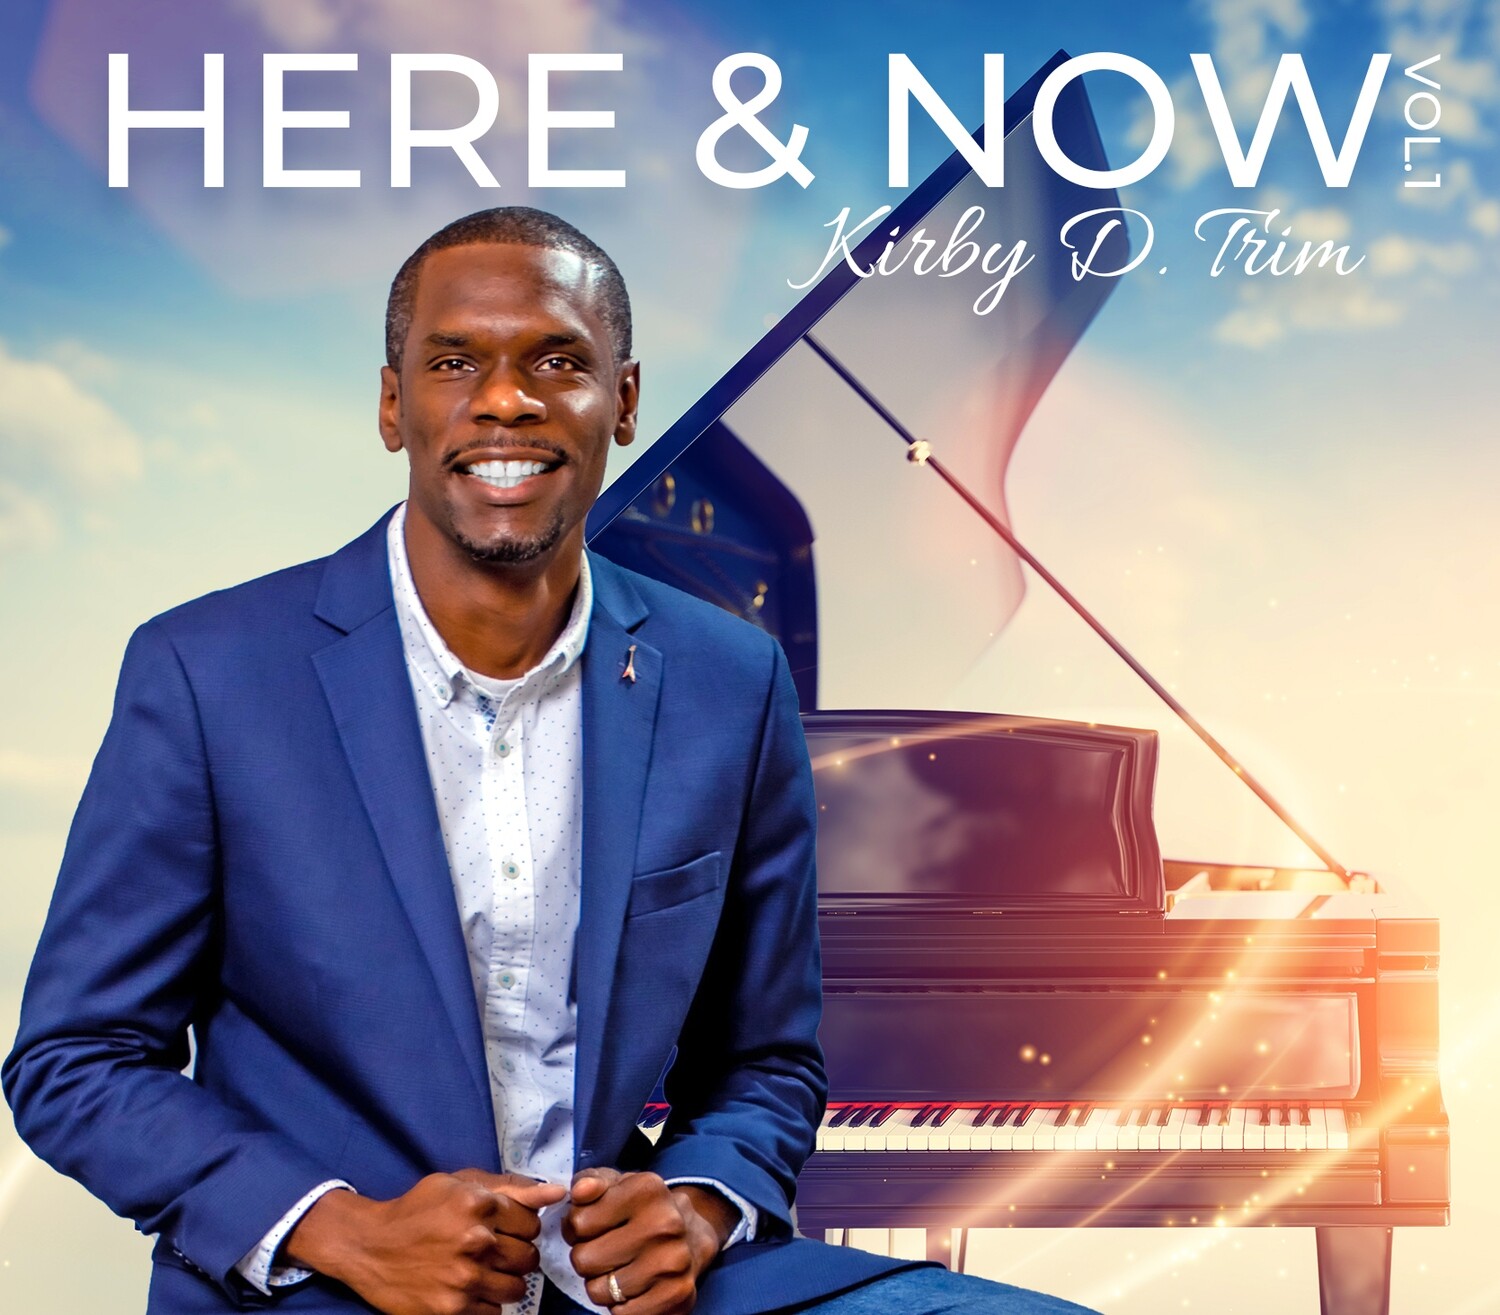 Here And Now Vol. 1 by Kirby D. Trim - Download